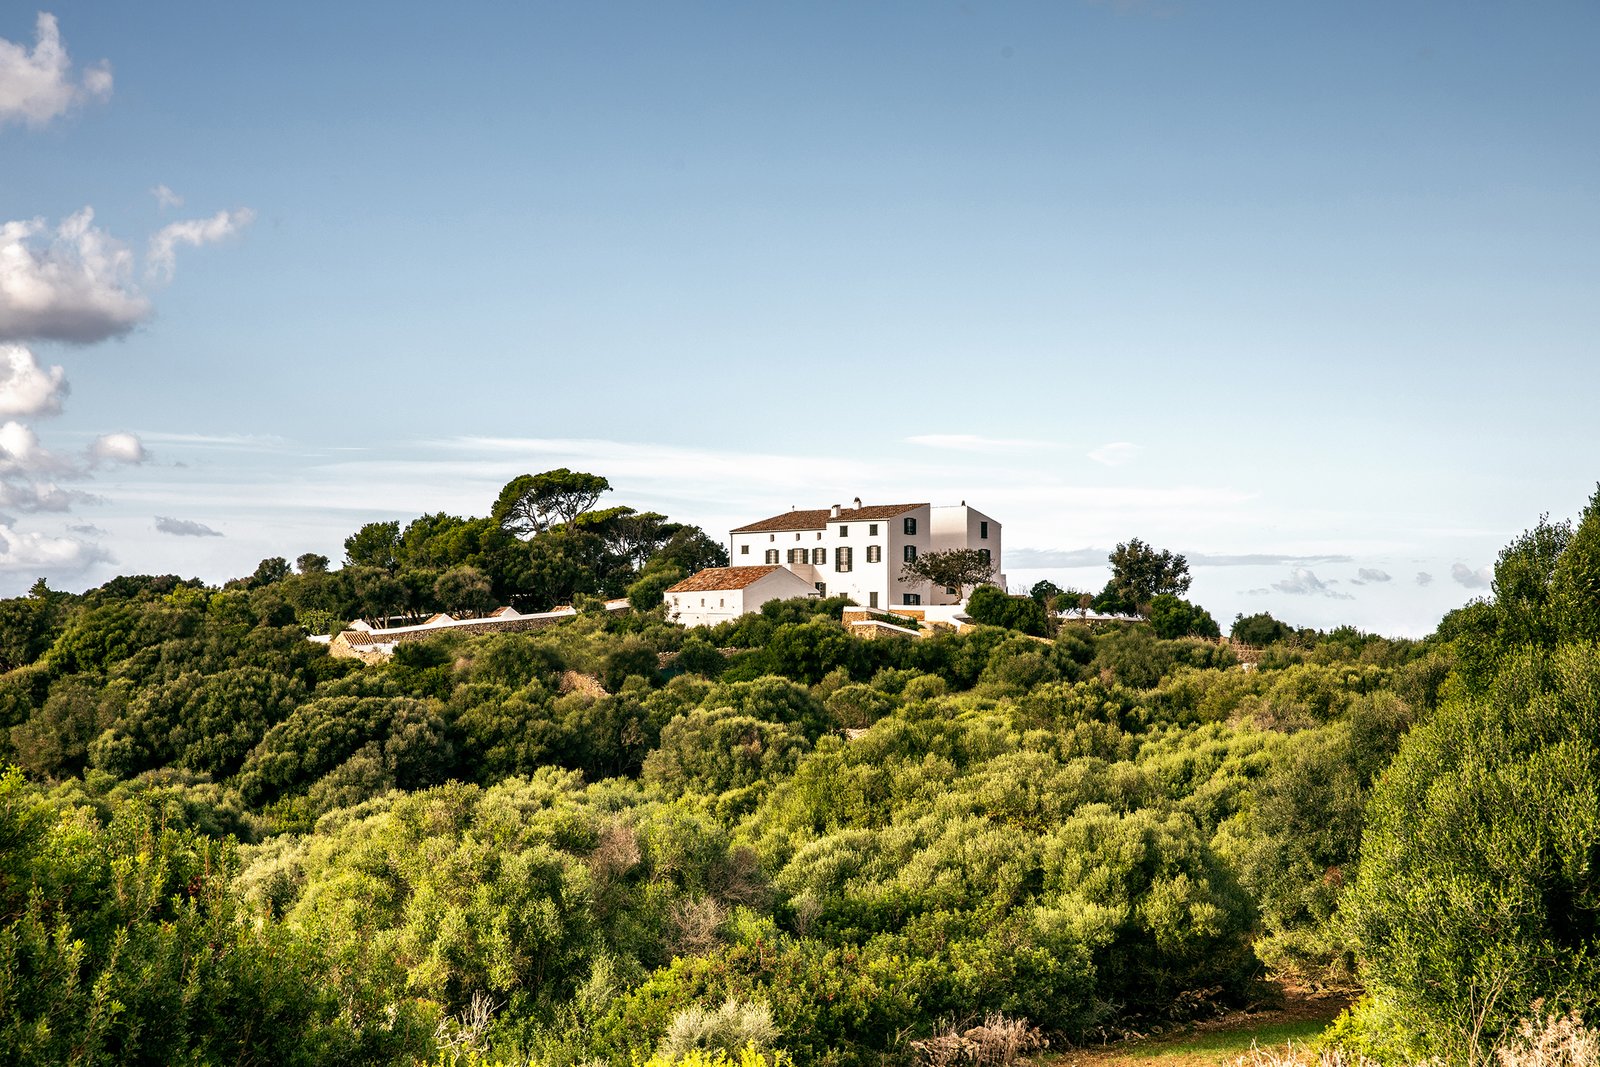 Located high up on a hill, Es Bec d'Aguila is a place to truly escape urban life by finding sanctuary in Menorca's rugged landscape.